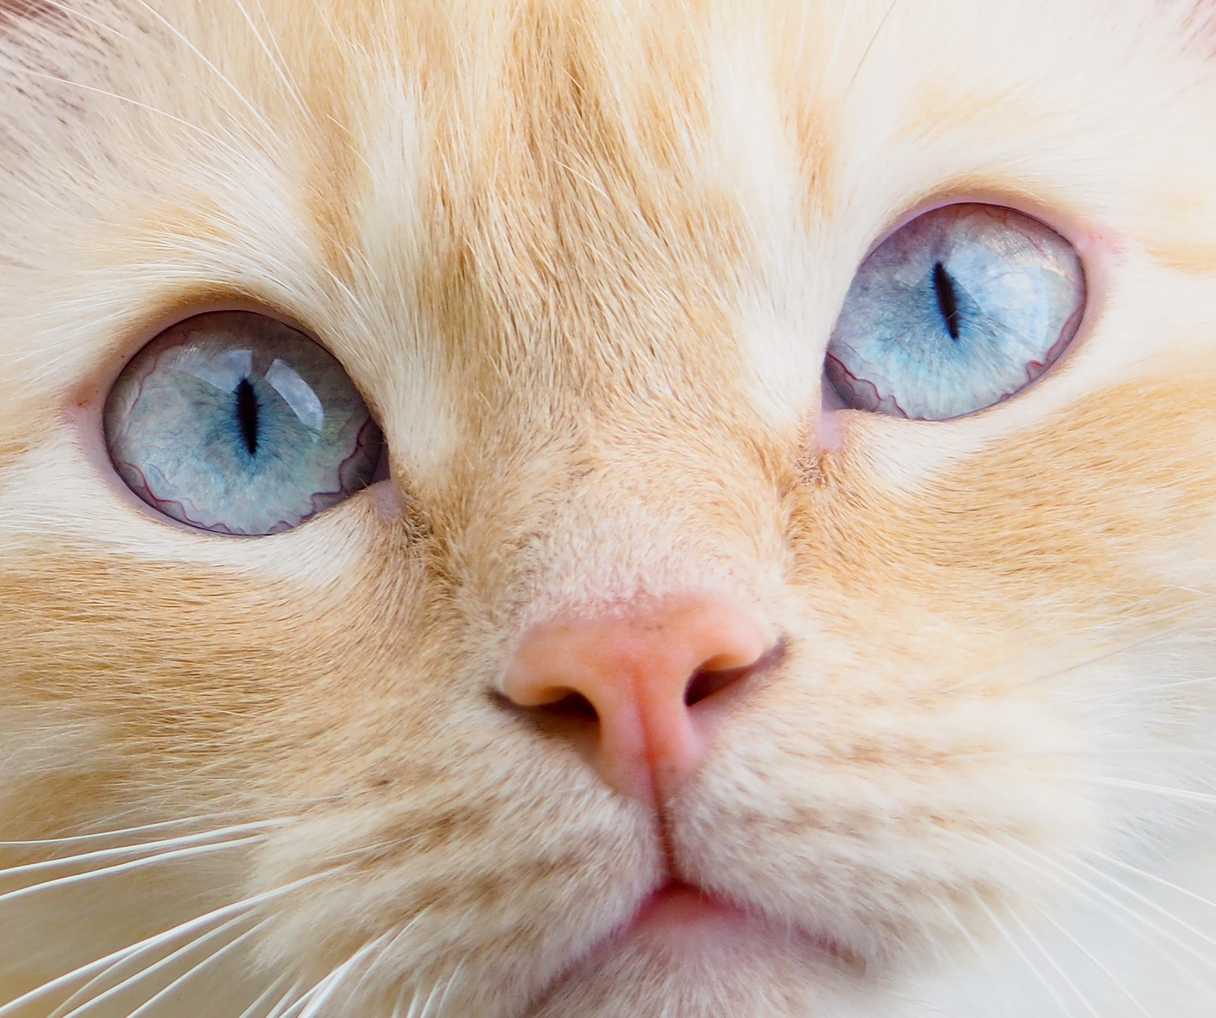 ginger-cat-with-blue-eyes-close-up.jpg